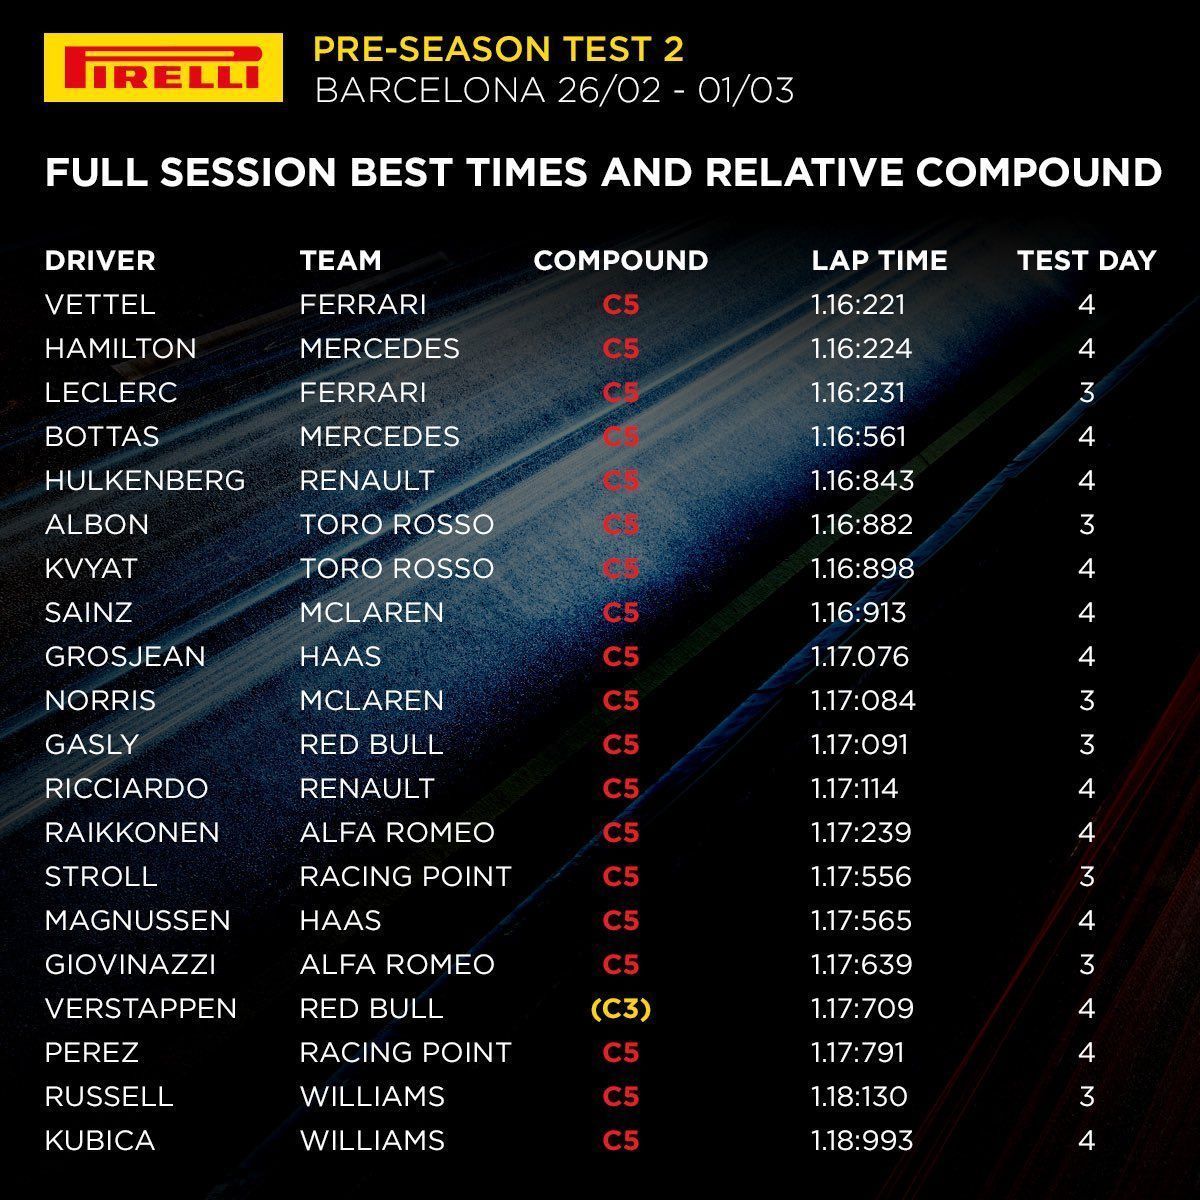 f1 testing results today